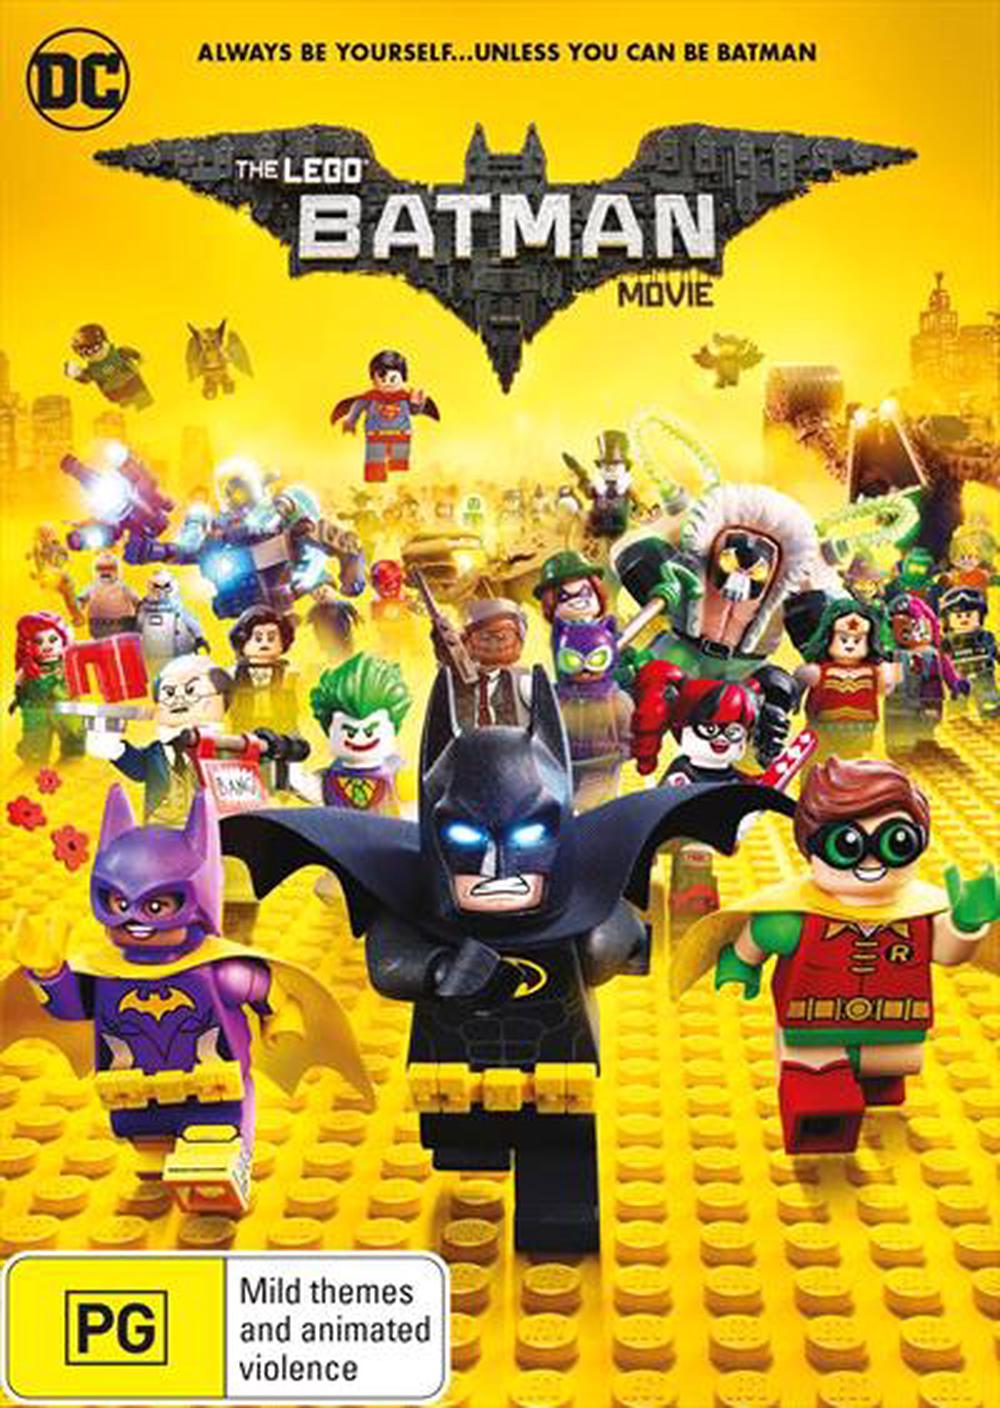 LEGO Batman Movie, The, DVD | Buy online at The Nile